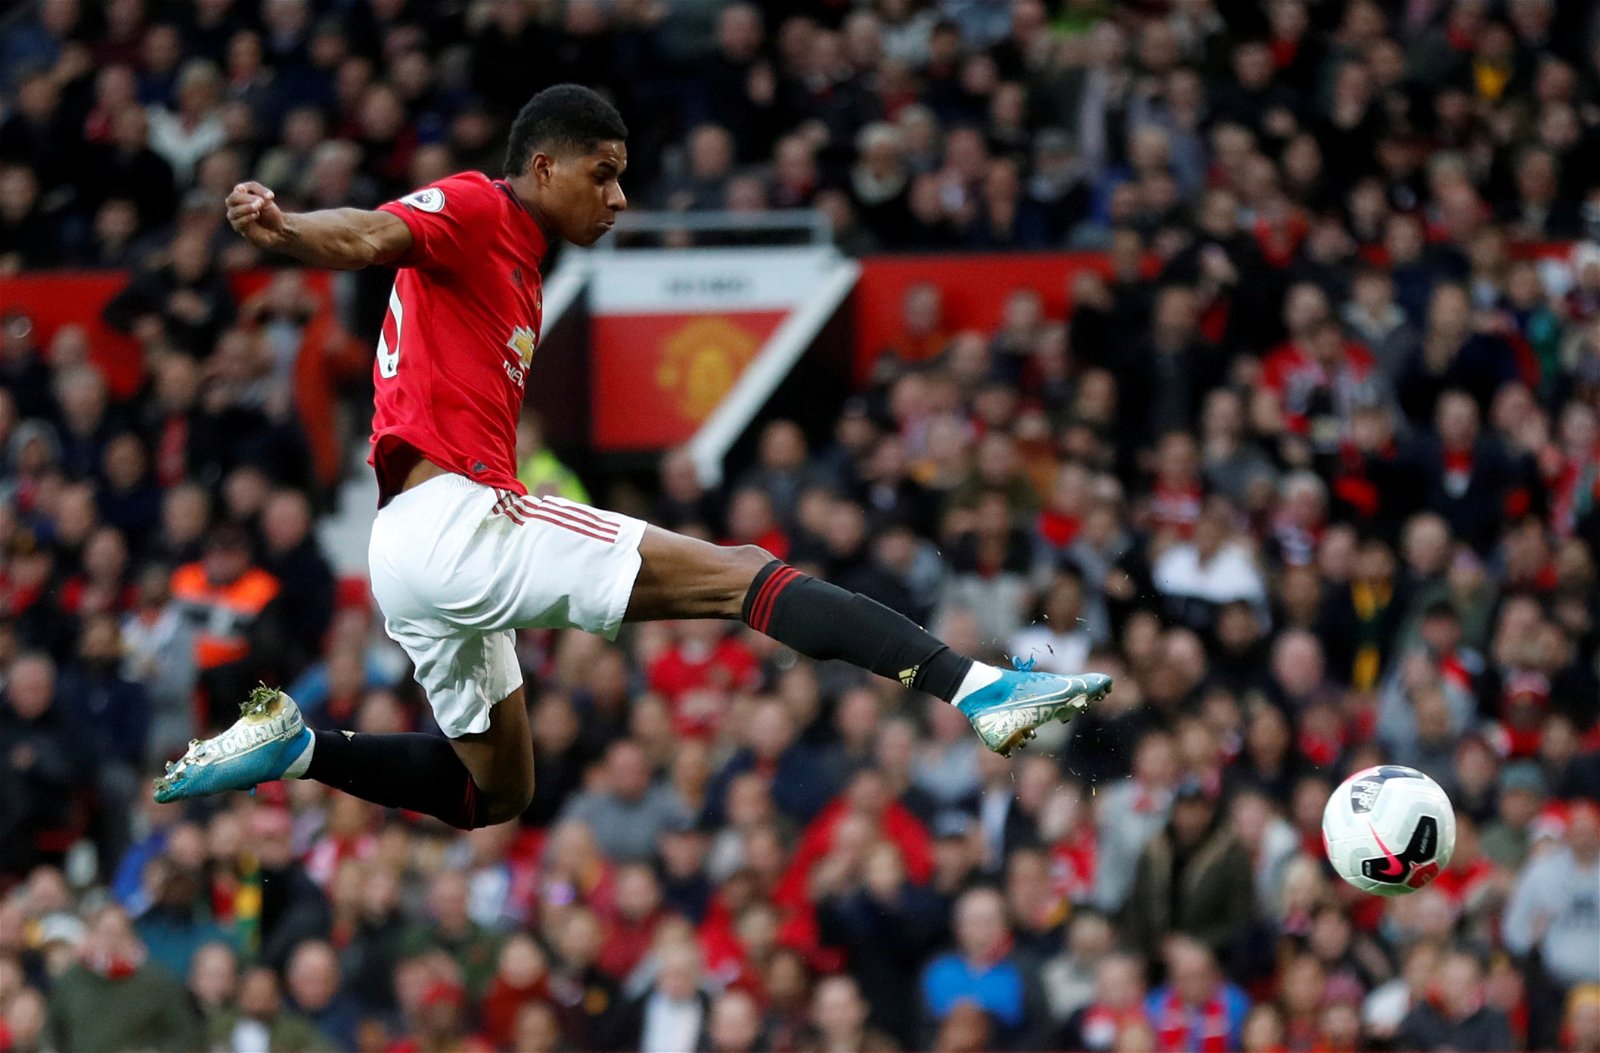 Marcus Rashford is one of the fastest footballer in the World (Manchester United) - 36 KMph